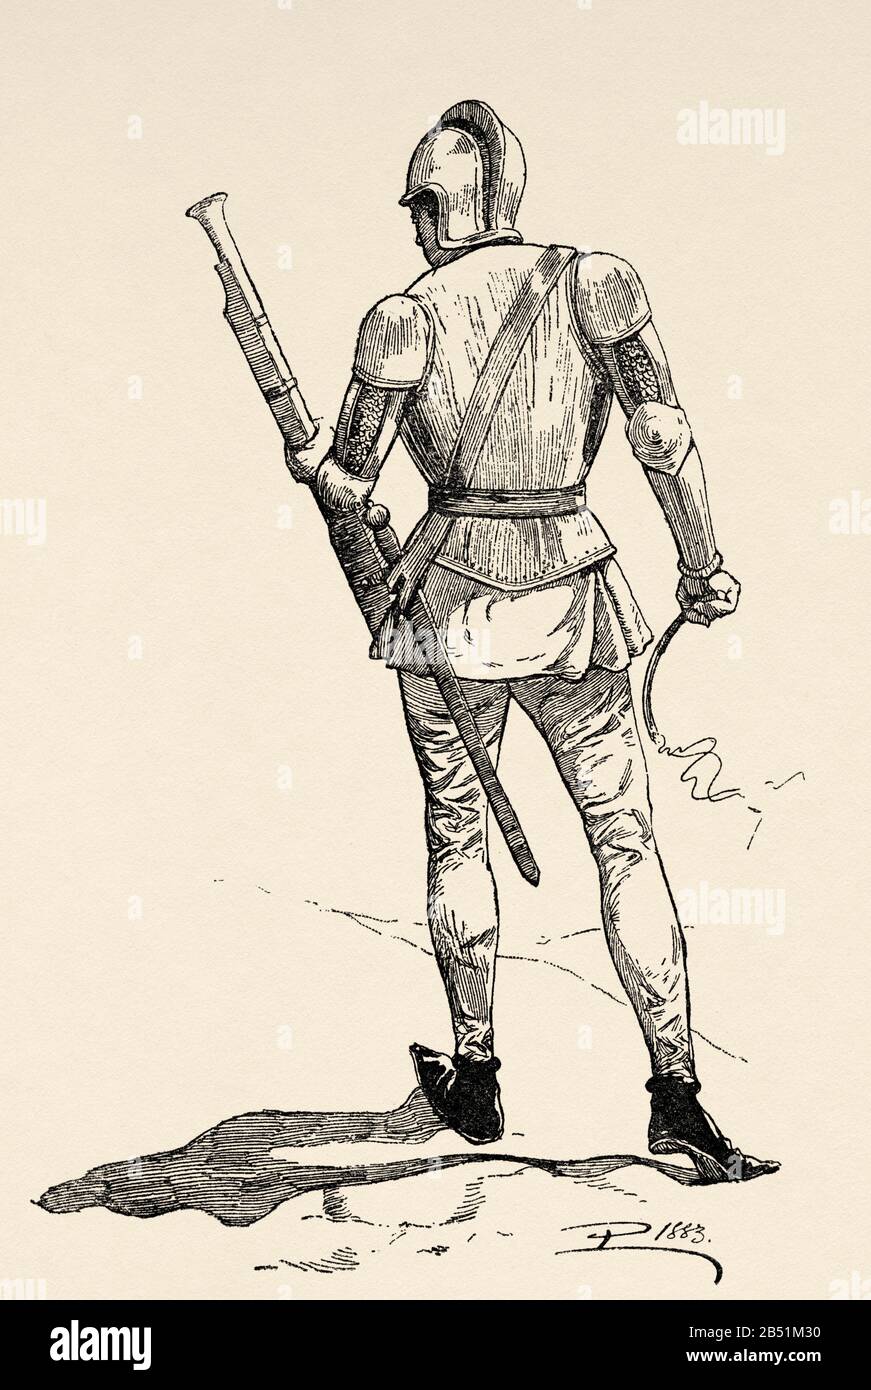 Espingardero, infantryman or cavalry armed with an advancing firearm called Espingarda, during the second half of the fifteenth century. Old engraving Stock Photo